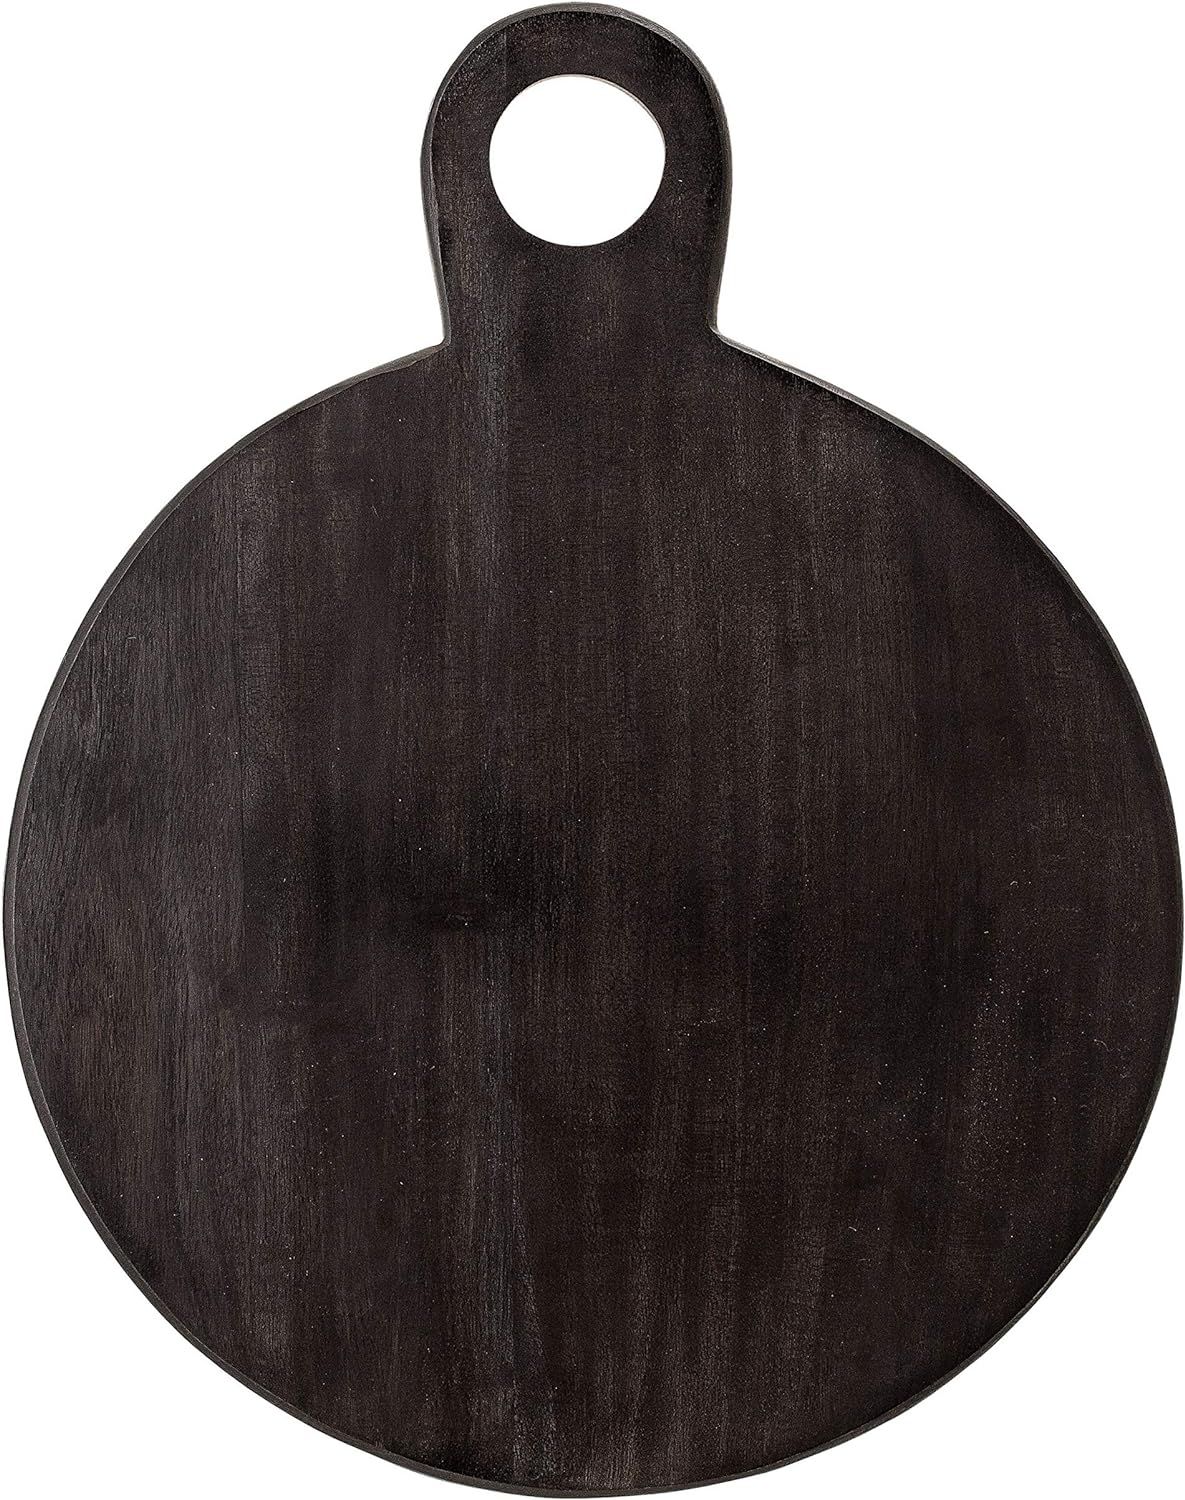 Bloomingville Round Acacia Wood Cheese and Cutting Board with Circle Handle, Black | Amazon (US)